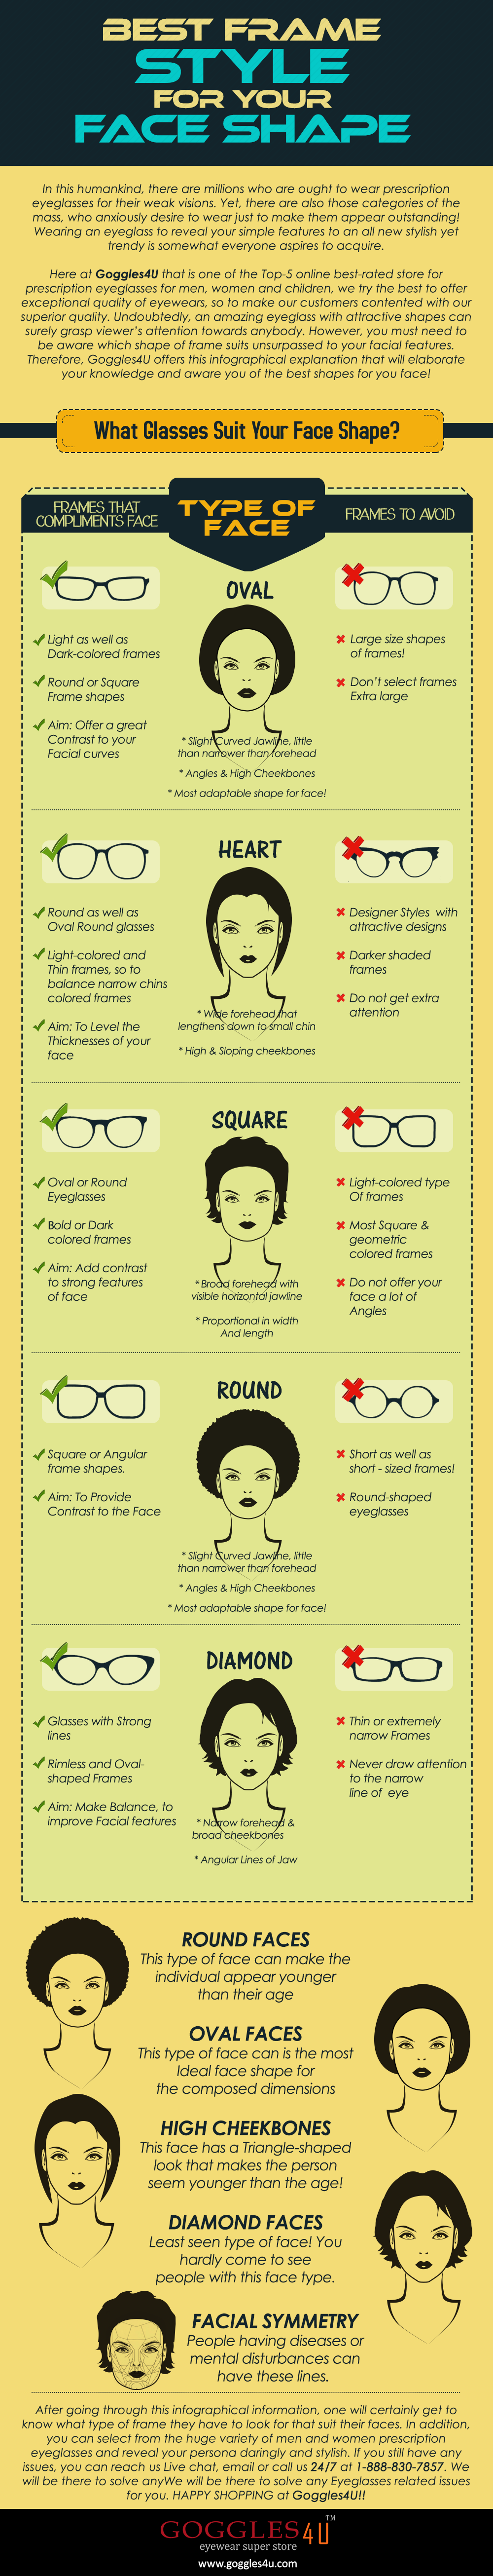 Infographic Eyeglasses According to Face Shapes